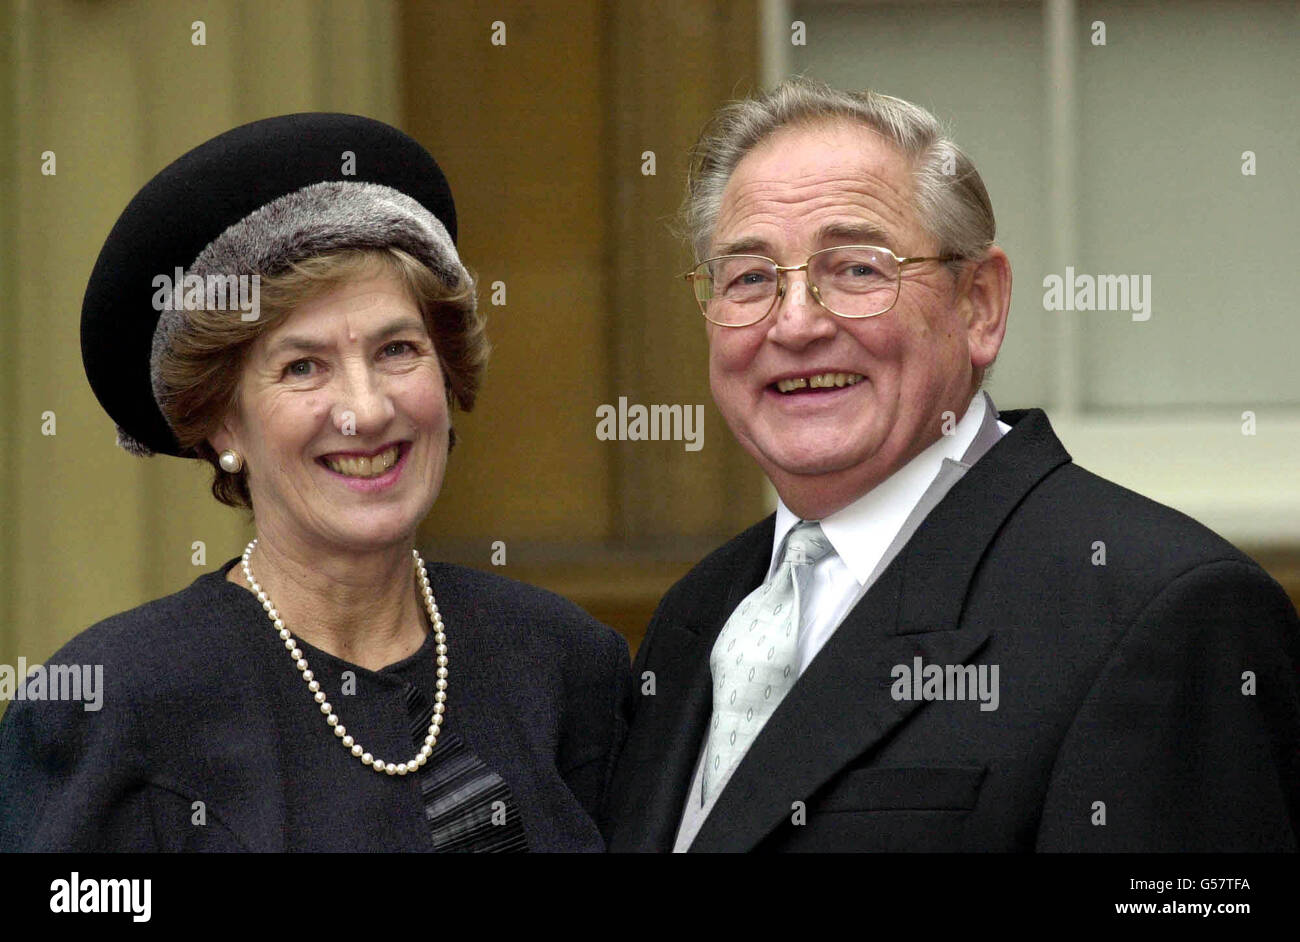 Governor of the Bank of England Sir Edward George with his wife Vanessa at Buckingham Palace, after receiving a knighthood from the Queen. * Known until now as Eddie, the new knight of Threadneedle Street said his wife - now Lady George - had always preferred people to call him Edward. 08/11/01 Sir Edward George, the Governor of the Bank of England cut UK interest rates by a half point to 4%. Stock Photo